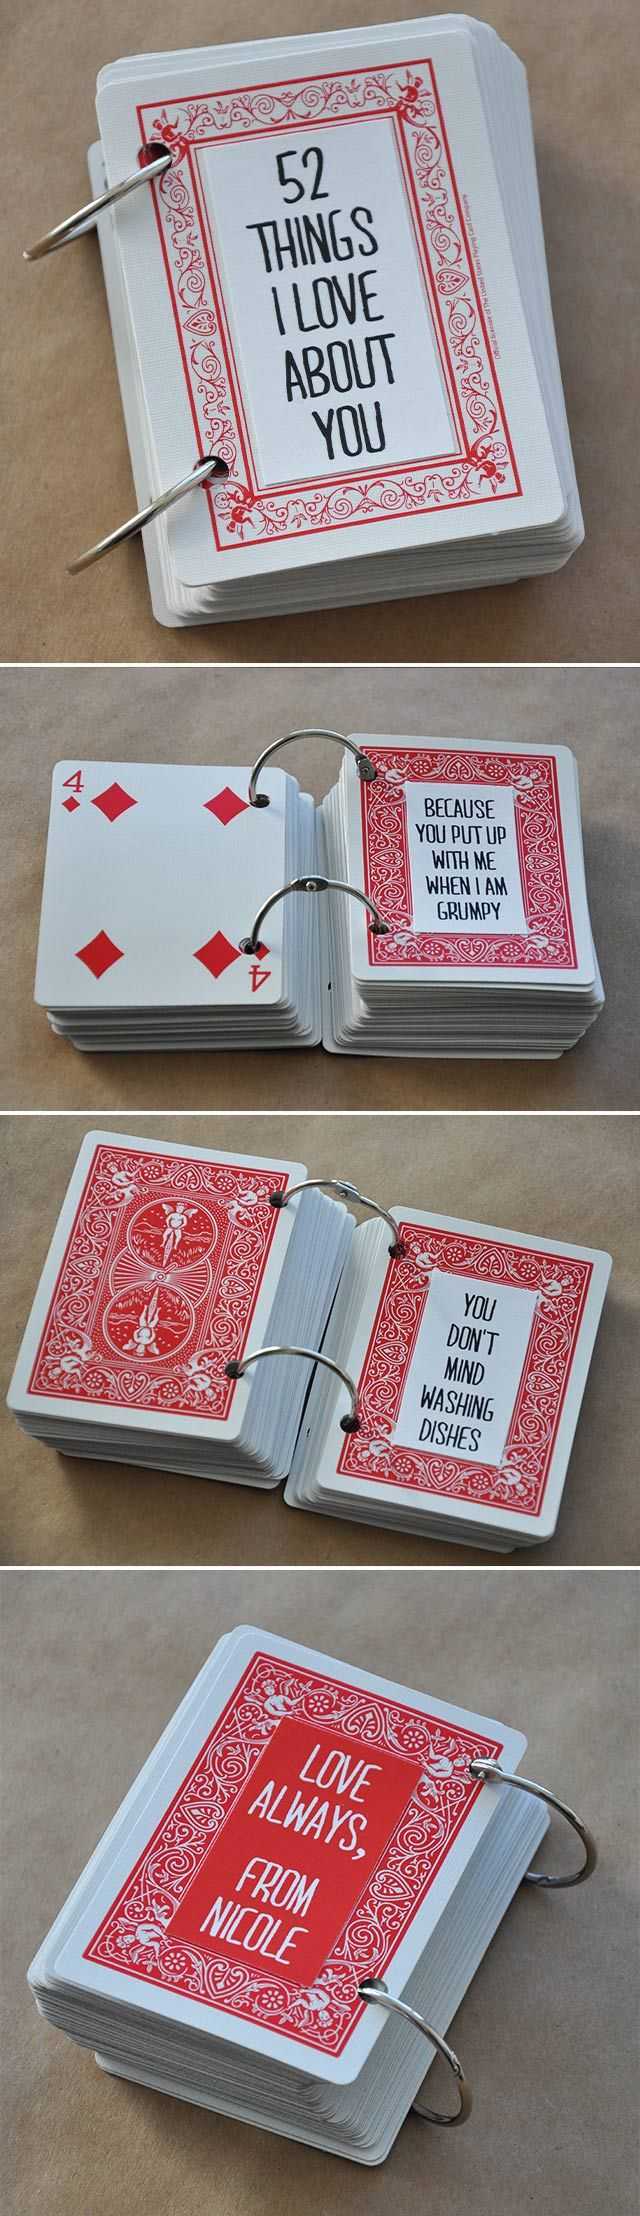 Hanna Megan (Hanna Garcia77) On Pinterest With Regard To 52 Things I Love About You Deck Of Cards Template